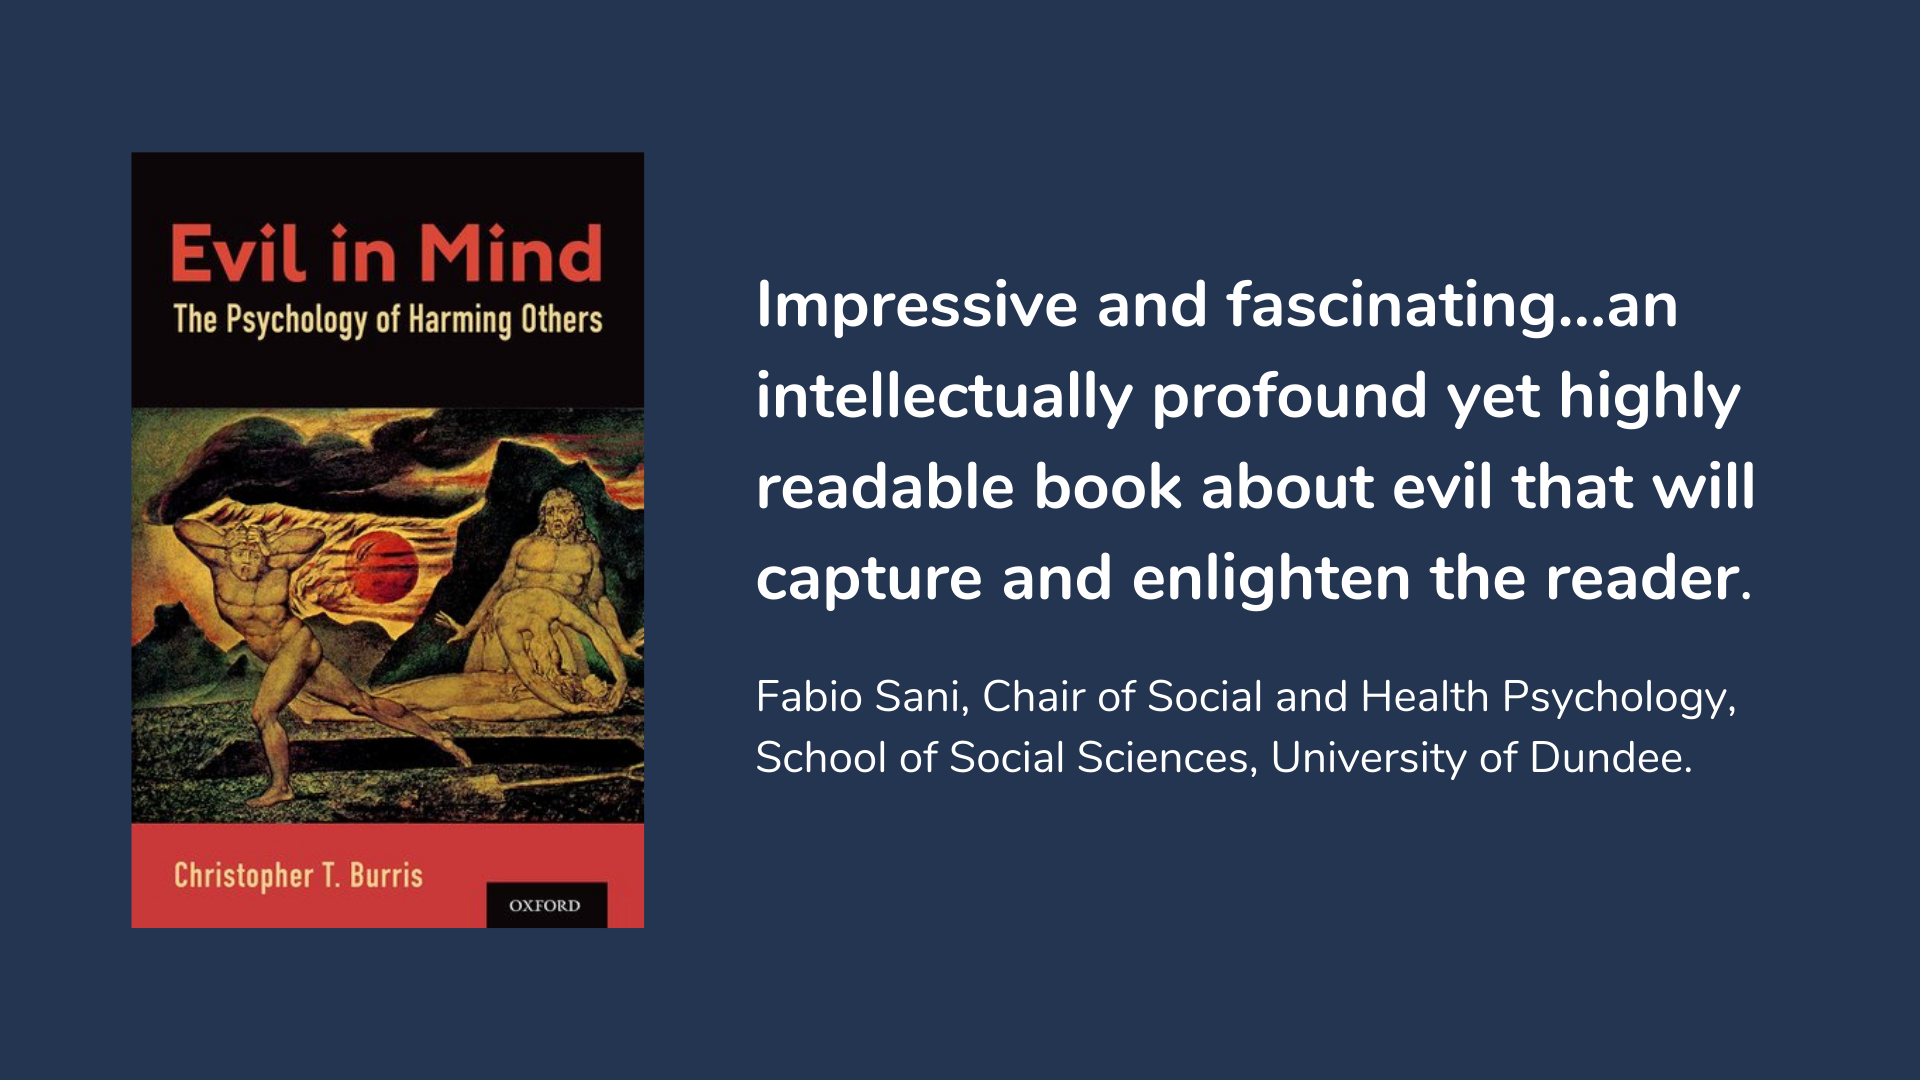 Evil in Mind: The Psychology of Harming Others, book cover and description.